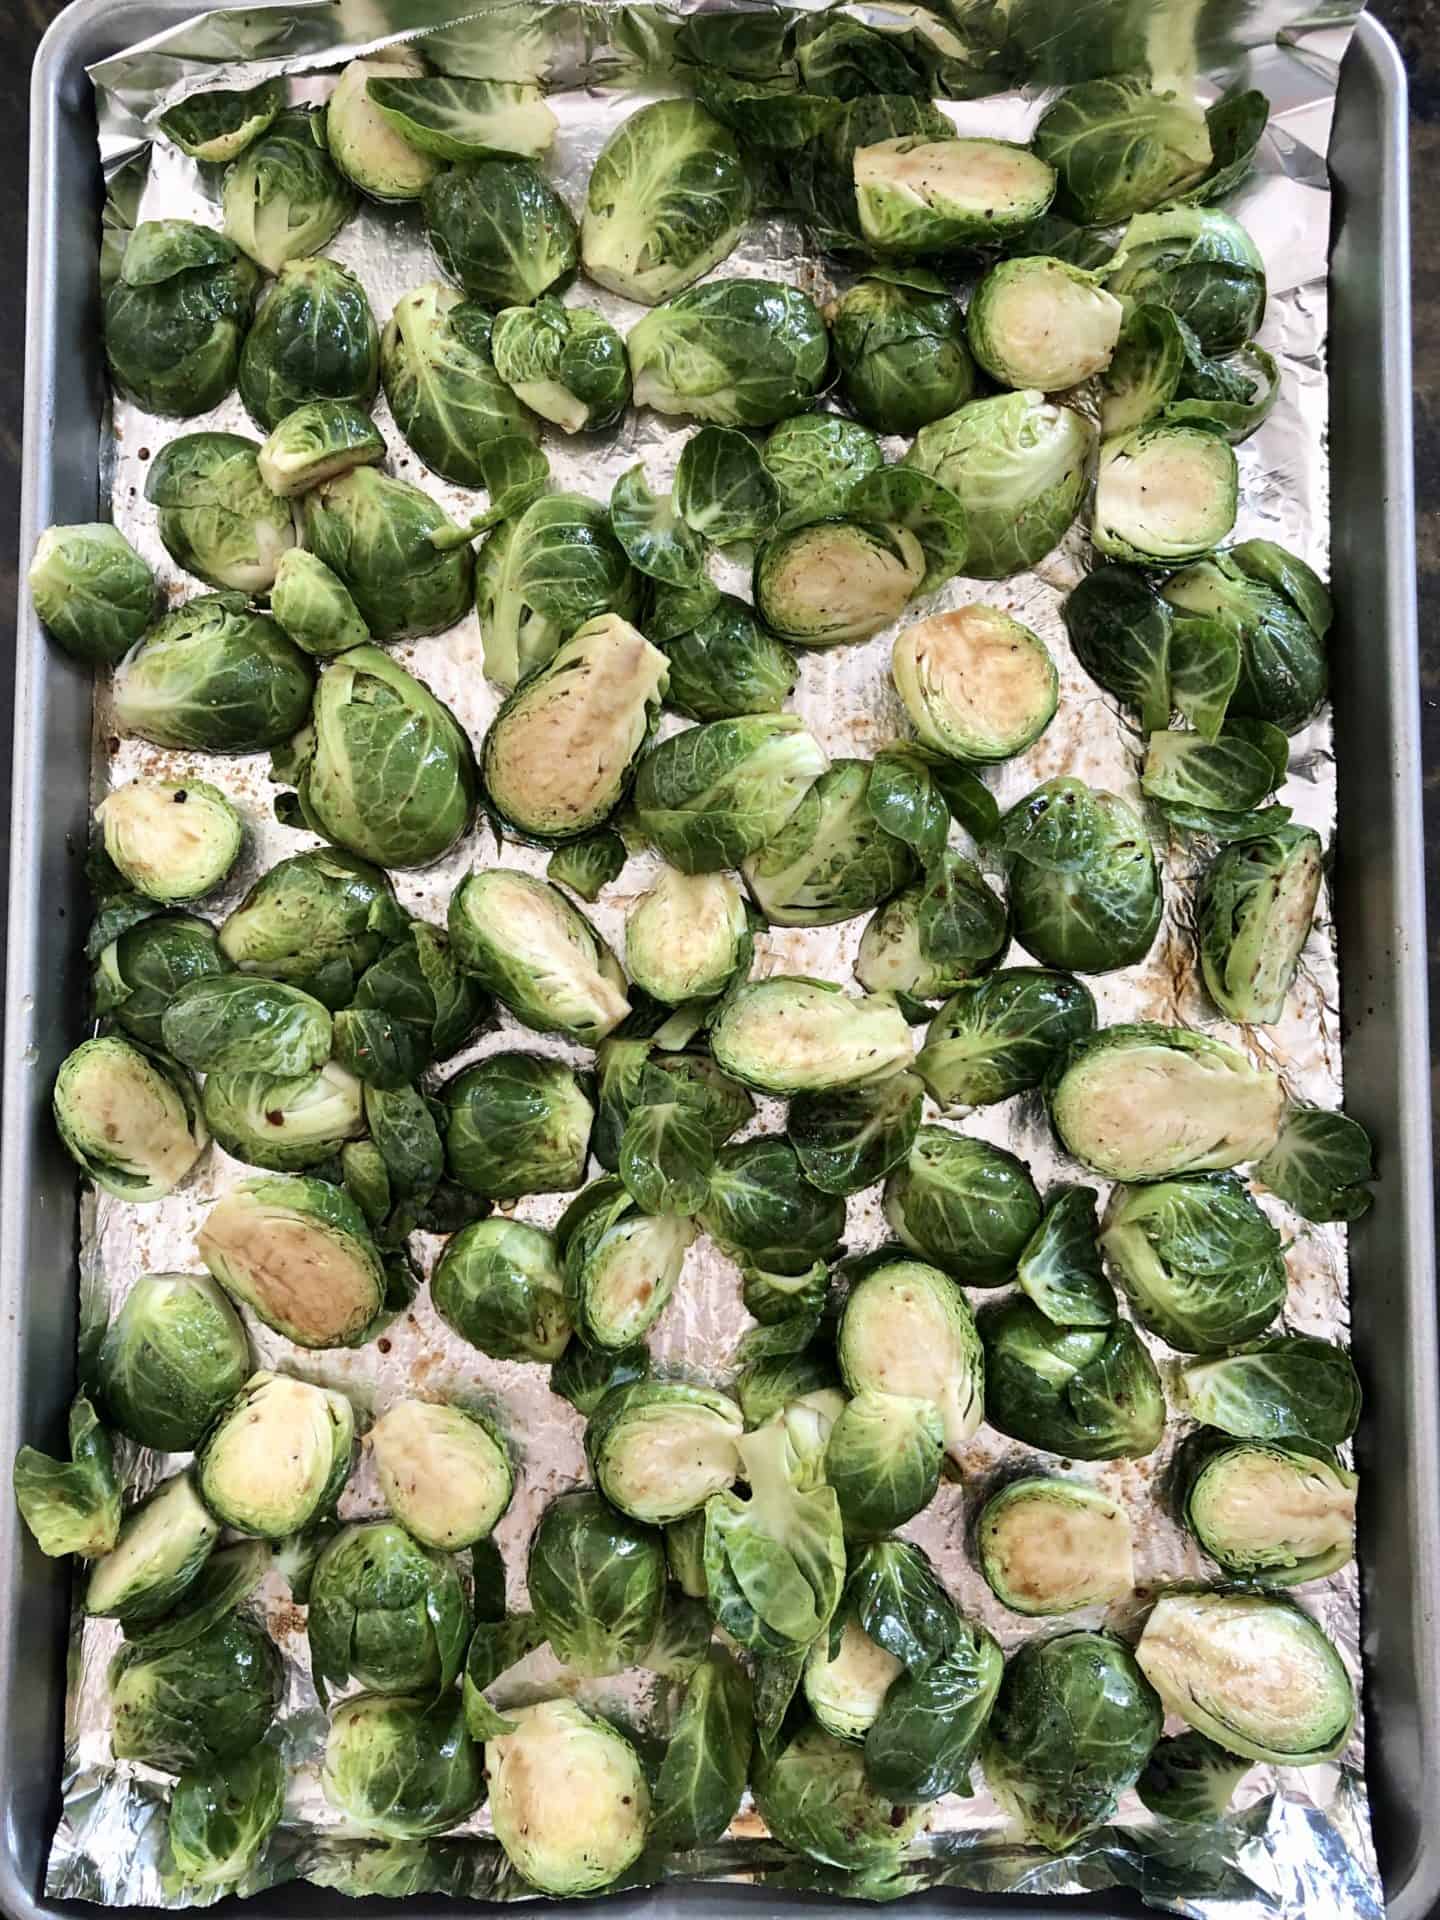 Brussels sprouts on baking sheet ready to be roasted